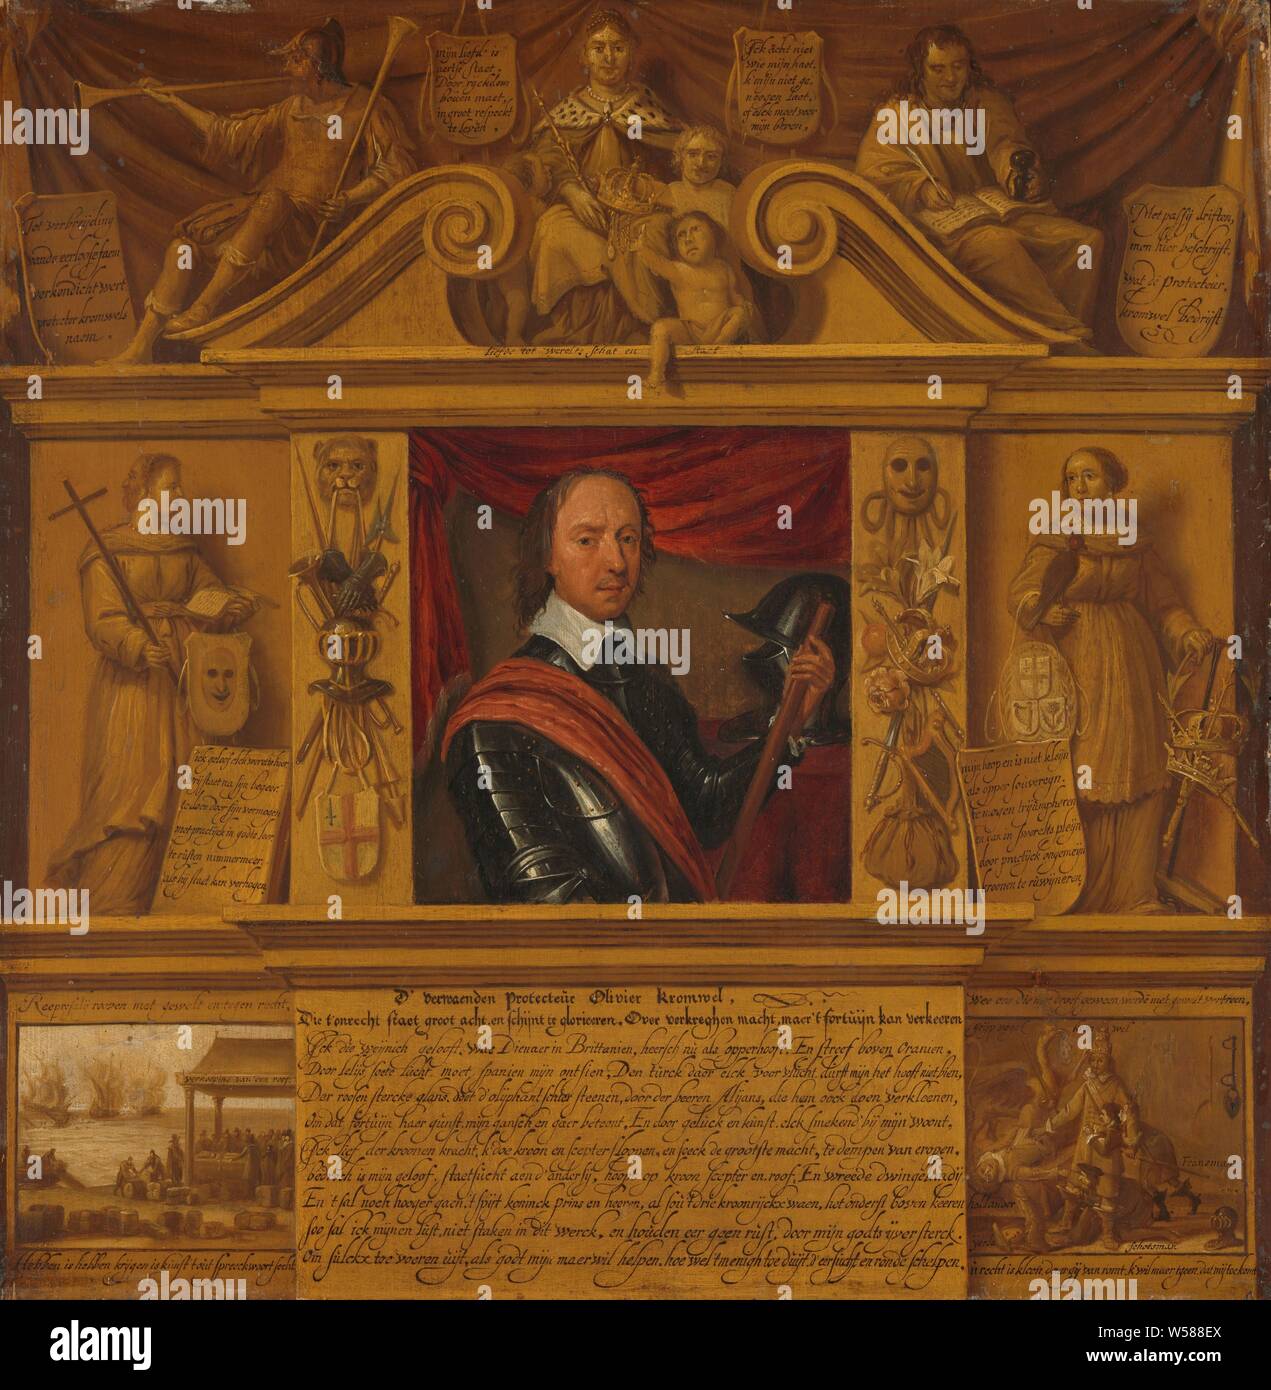 Portrait of Oliver Cromwell, in a Frame with Allegorical Figures and Historical Representations, Portrait of Oliver Cromwell (1599-1658) in an architectural setting with allegorical figures and historical representations. Cromwell is presented in half body, in armor, on either side of festivals with symbols of battle and of England. At the top personifications of Faam, the ruling Love and the History or History. Left Faith, right Hope. Bottom left robbing and blowing up merchant ships. On the right an allegorical representation in which Cromwell is crowned by the dragon 'gripping bird' Stock Photo